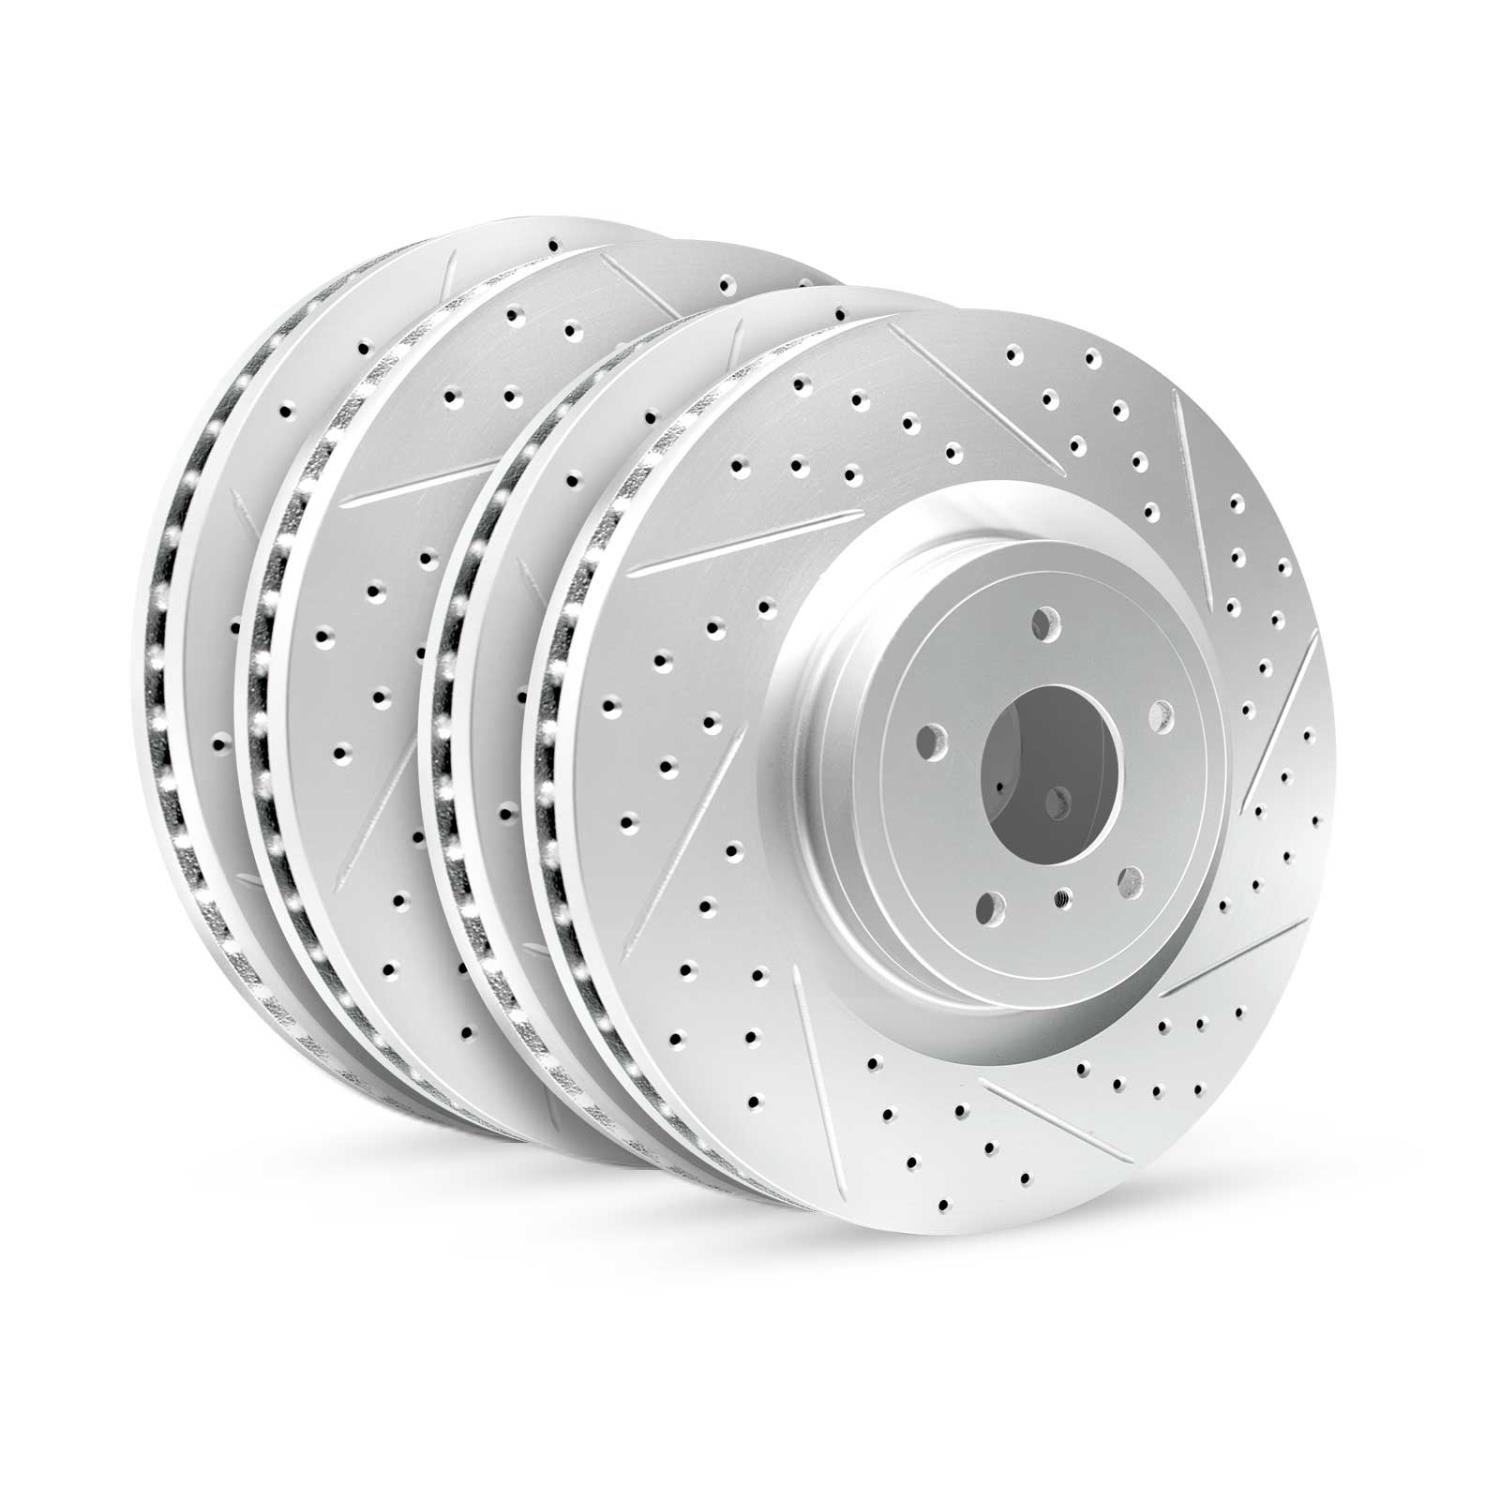 GEO-Carbon Drilled/Slotted Rotors, 2007-2015 BMW, Position: Front/Rear